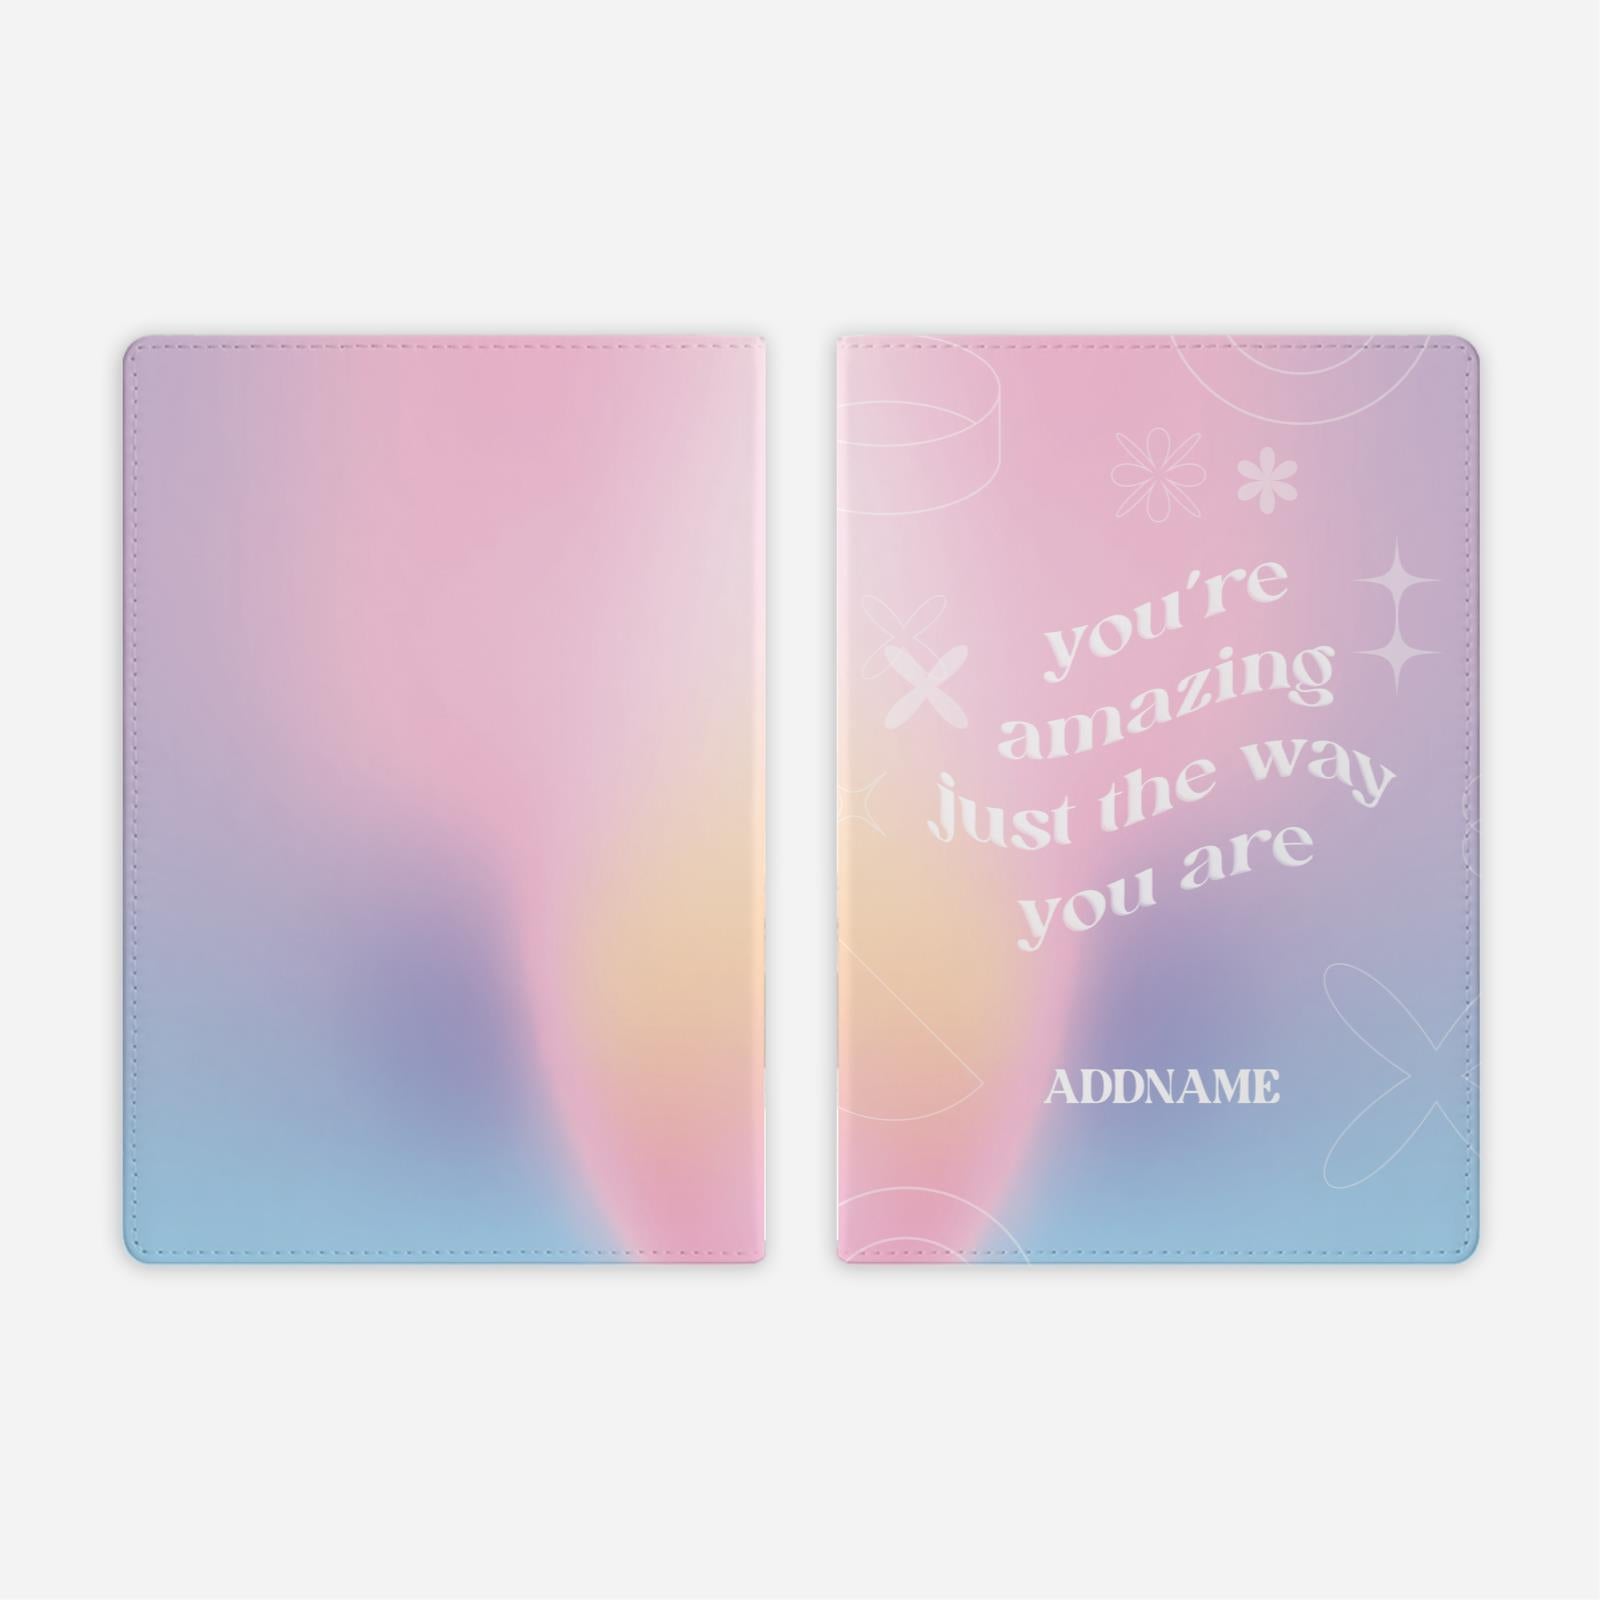 Be Confident Series Full Print Cover Notebook - You're Amazing Just The Way You Are